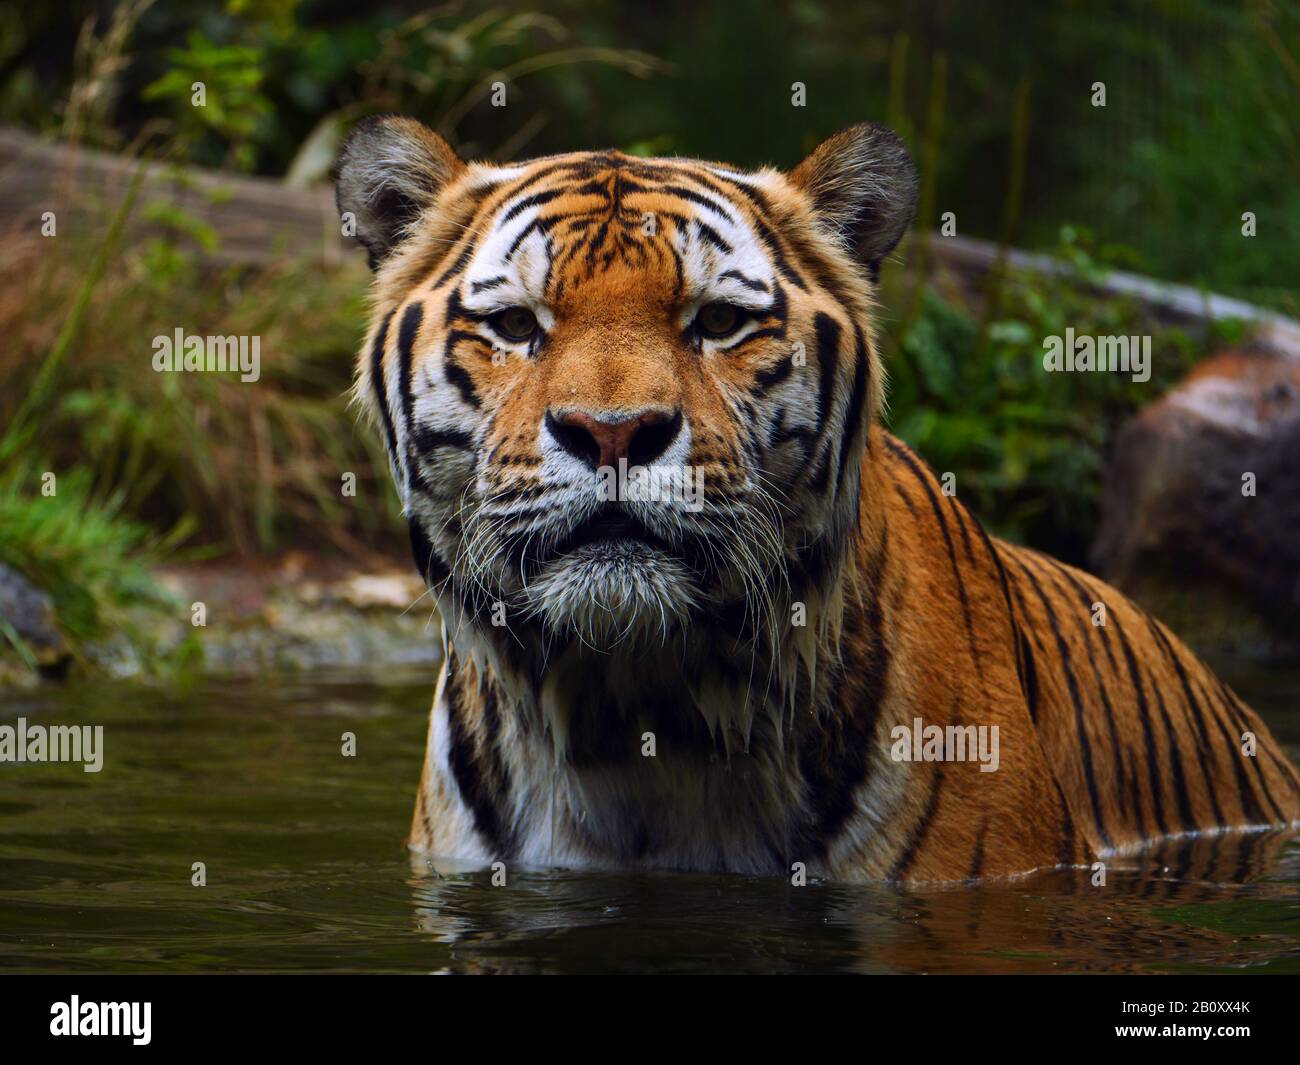 Siberian tiger, Amurian tiger (Panthera tigris altaica), standing in the water, front view Stock Photo